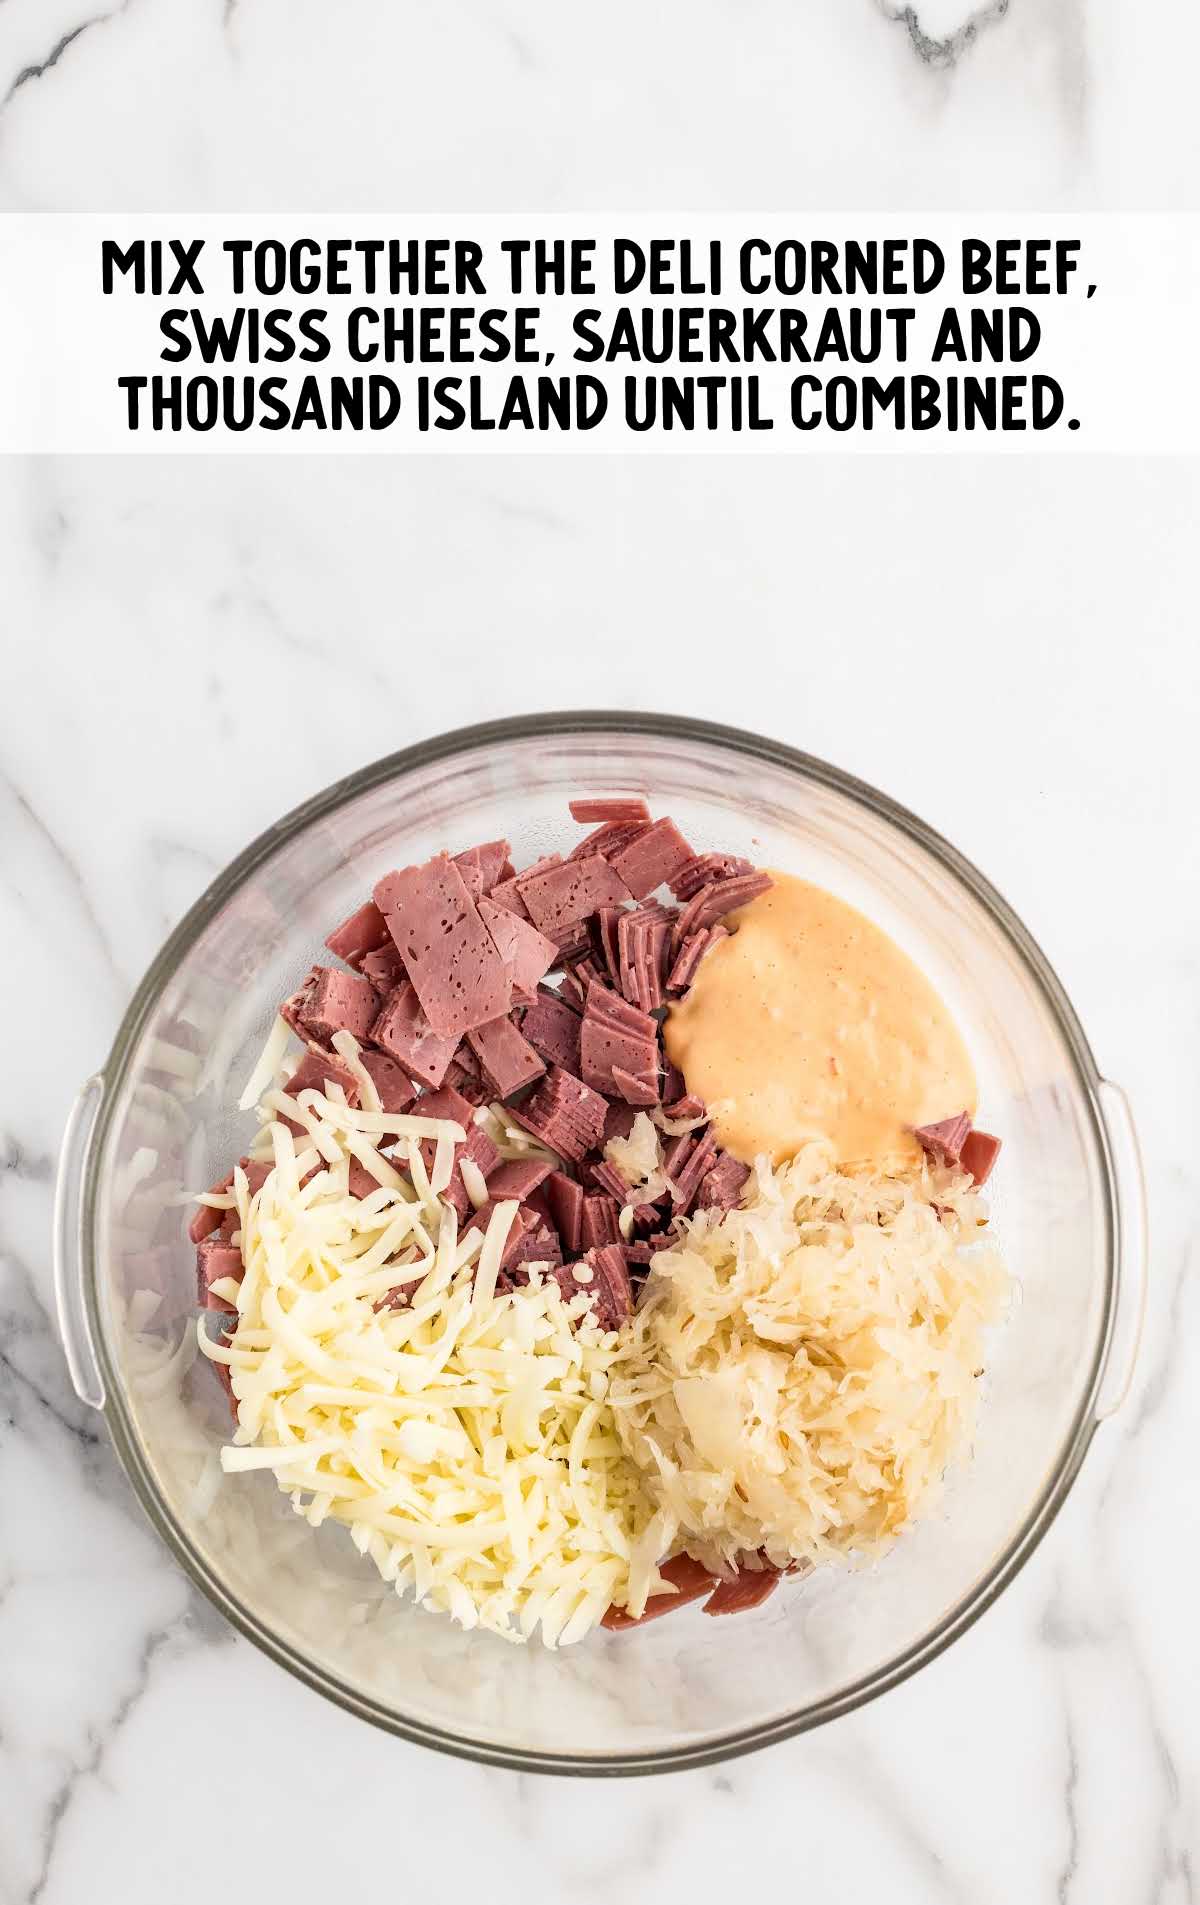 corned beef, shredded Swiss cheese, drained sauerkraut, and thousand island dressing mixed together in a bowl